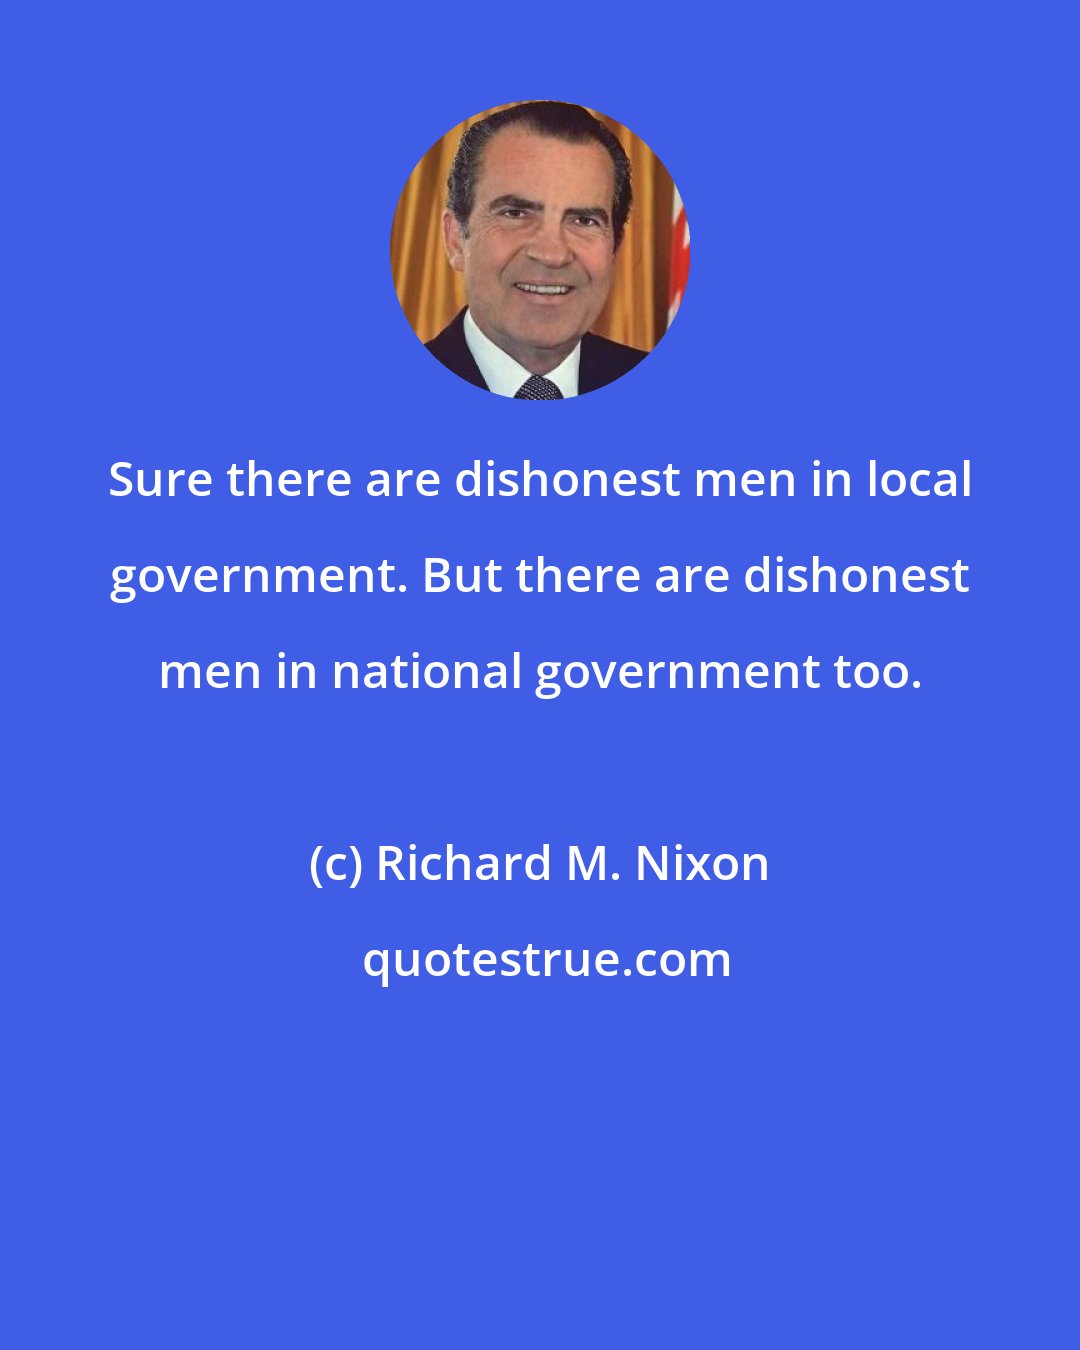 Richard M. Nixon: Sure there are dishonest men in local government. But there are dishonest men in national government too.